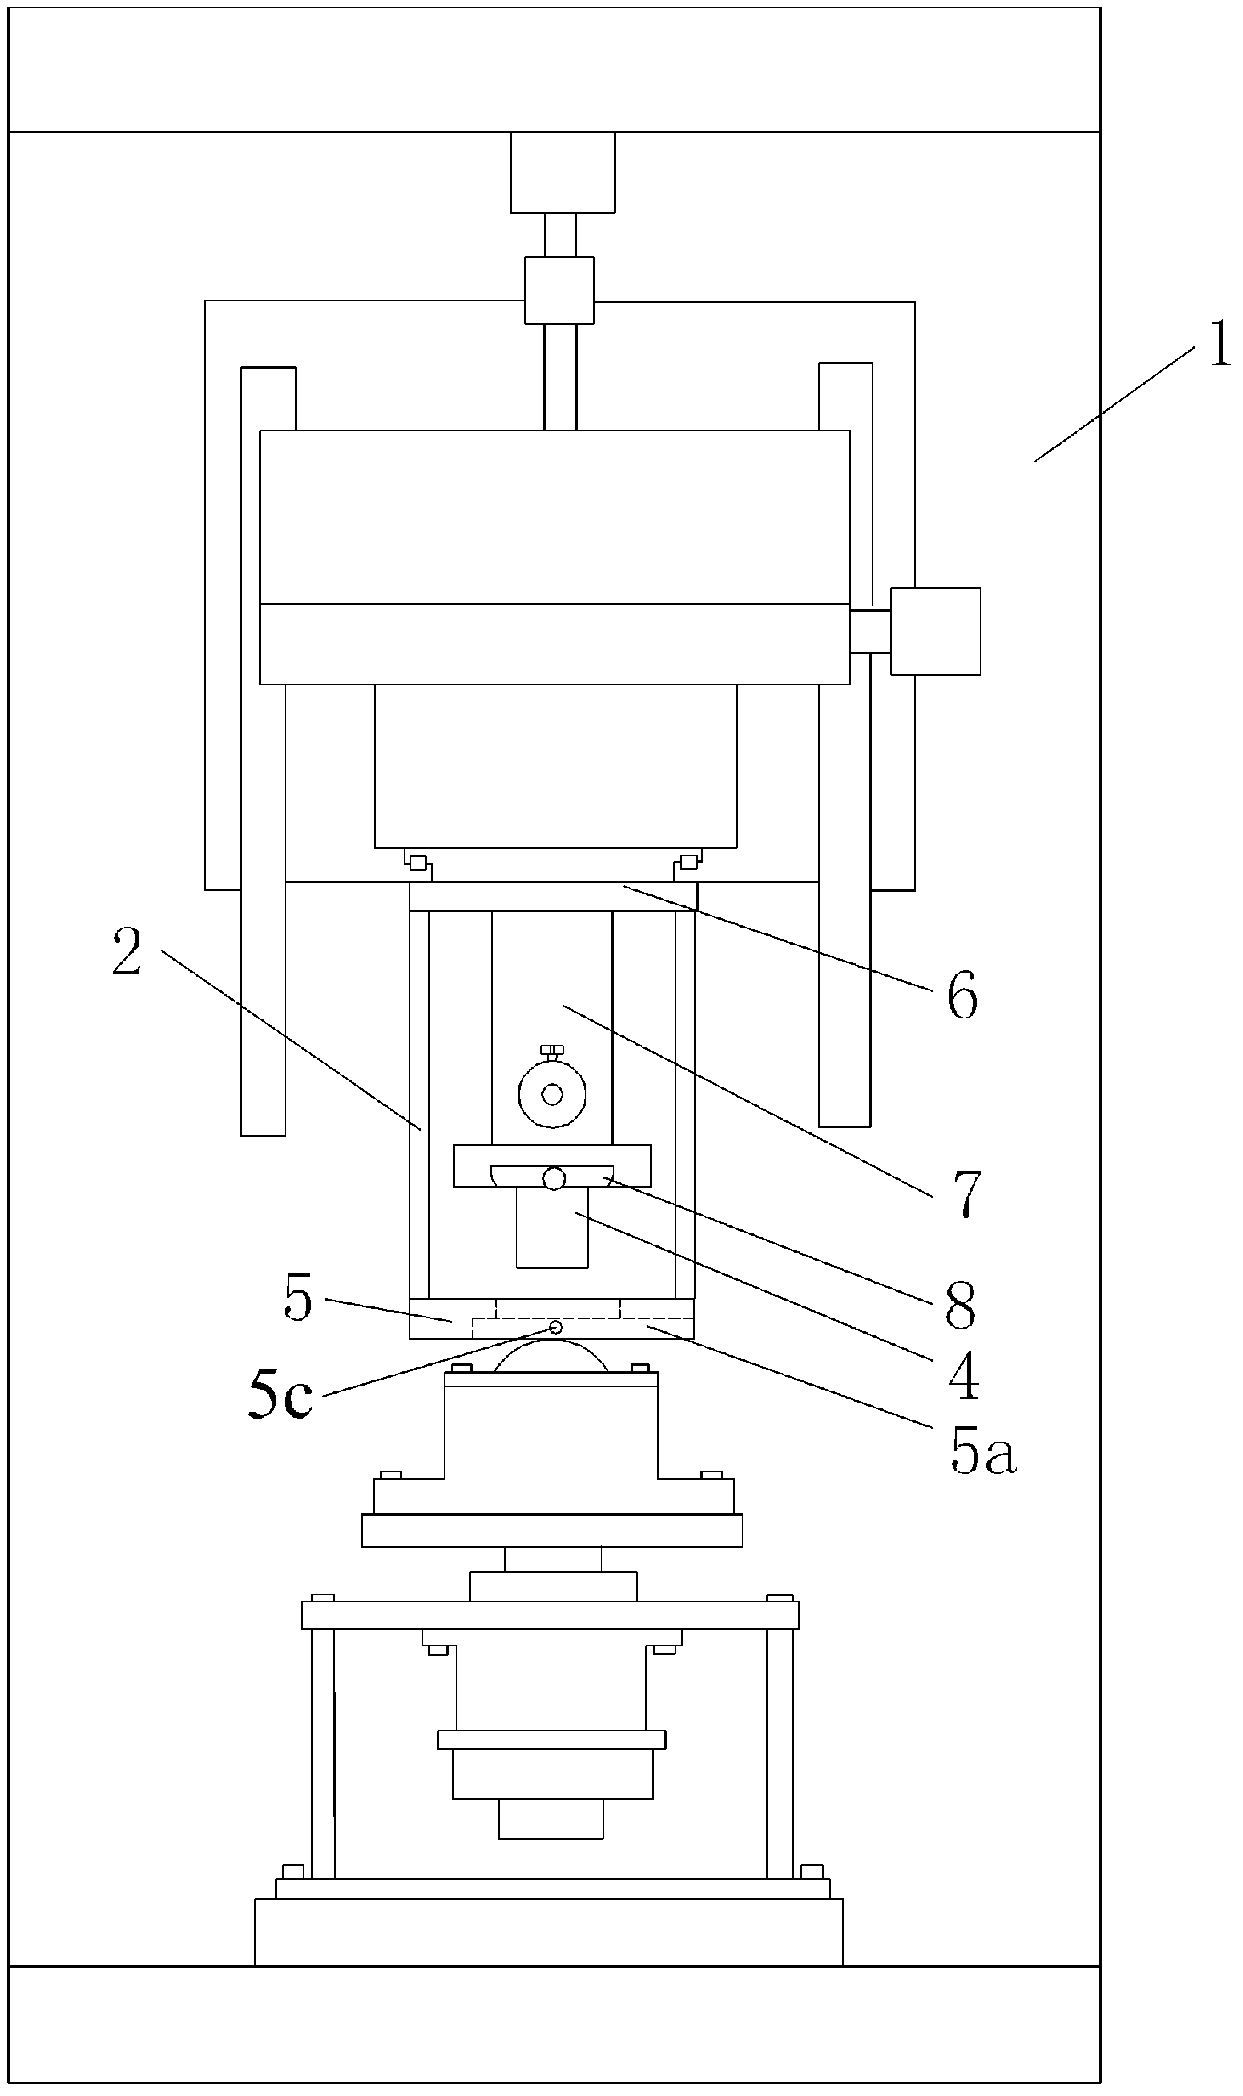 Apparatus for real time observation and recording of fretting wear